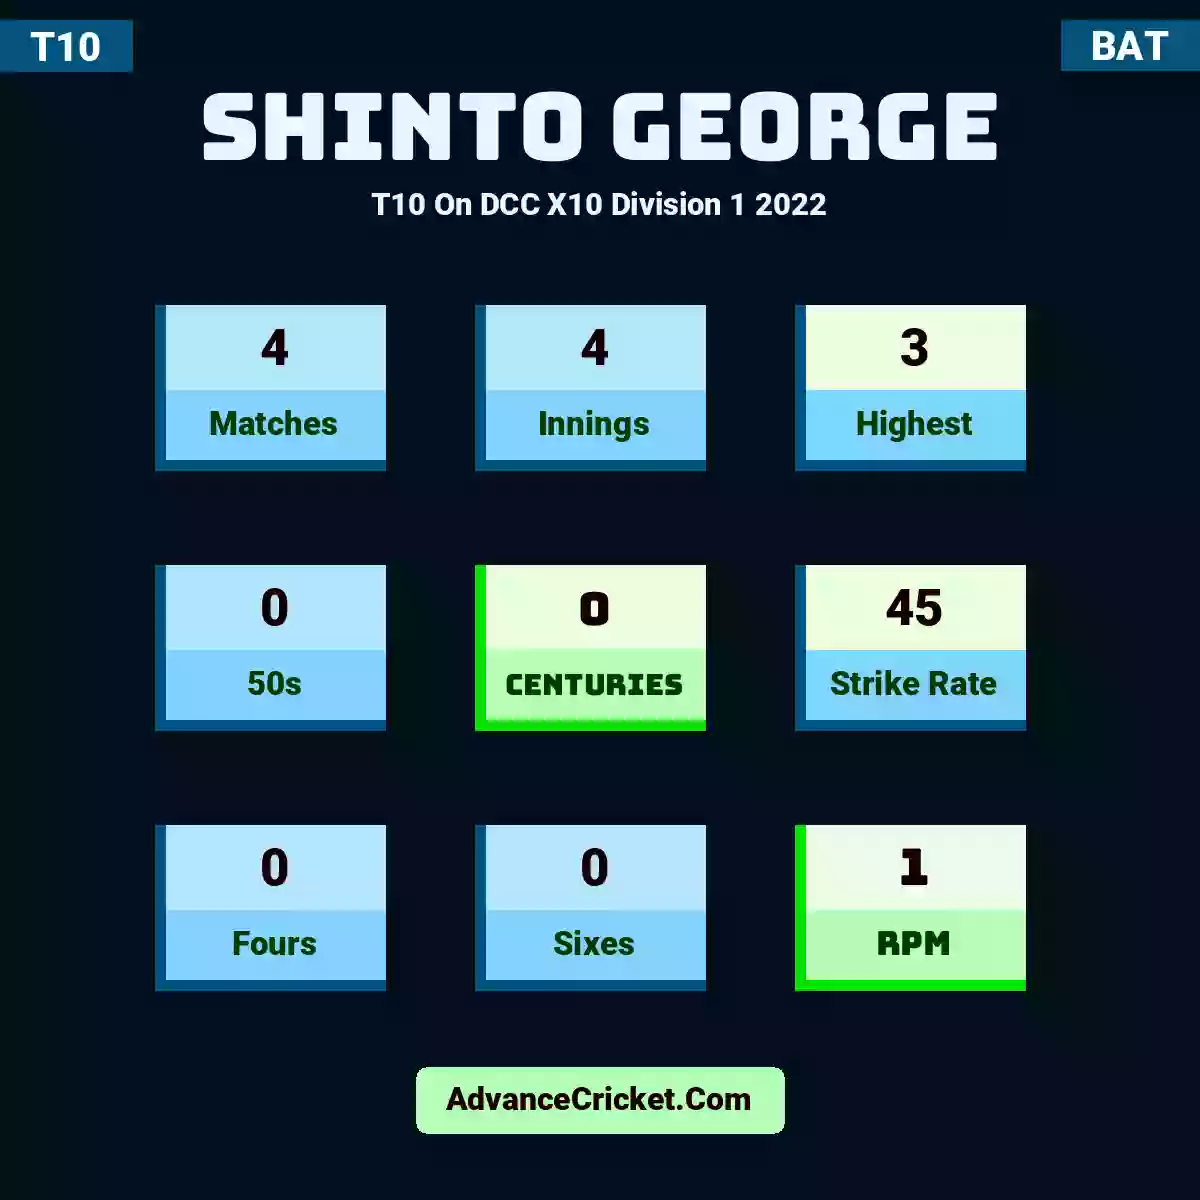 Shinto George T10  On DCC X10 Division 1 2022, Shinto George played 4 matches, scored 3 runs as highest, 0 half-centuries, and 0 centuries, with a strike rate of 45. S.George hit 0 fours and 0 sixes, with an RPM of 1.